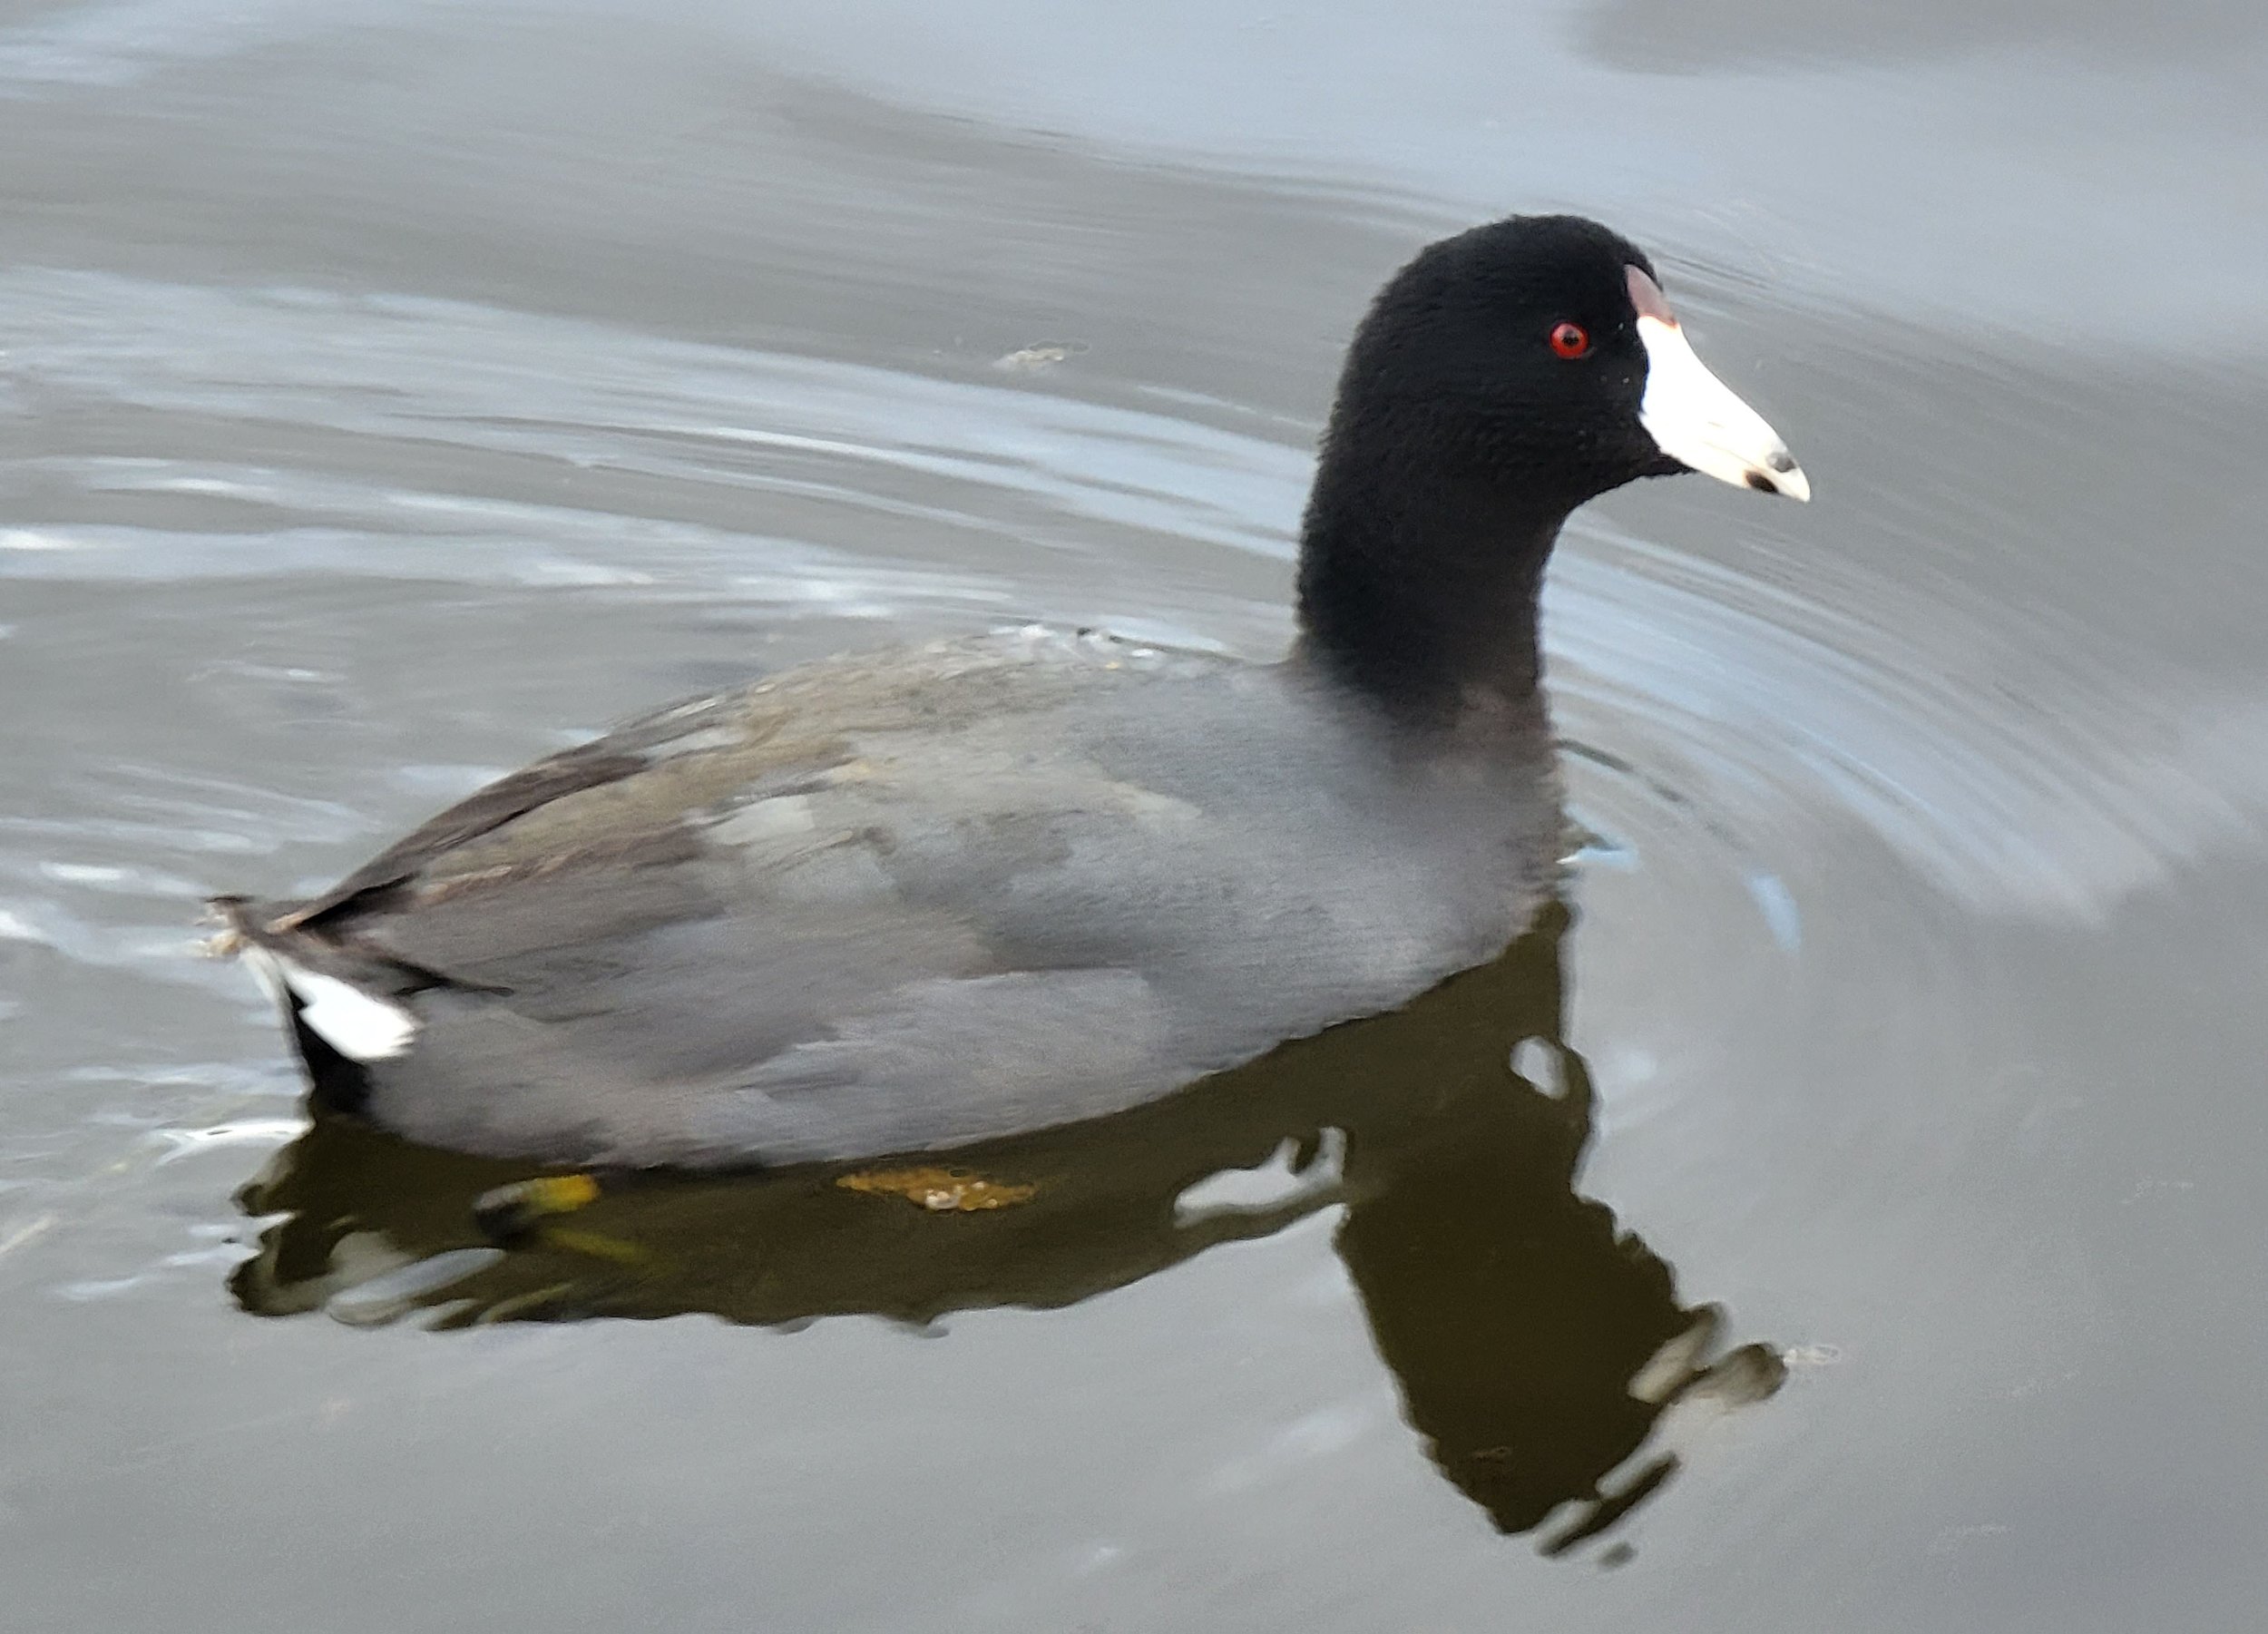 American Coot in Esquimalt Lagoon. Very hot spot for ducks here in the summer.